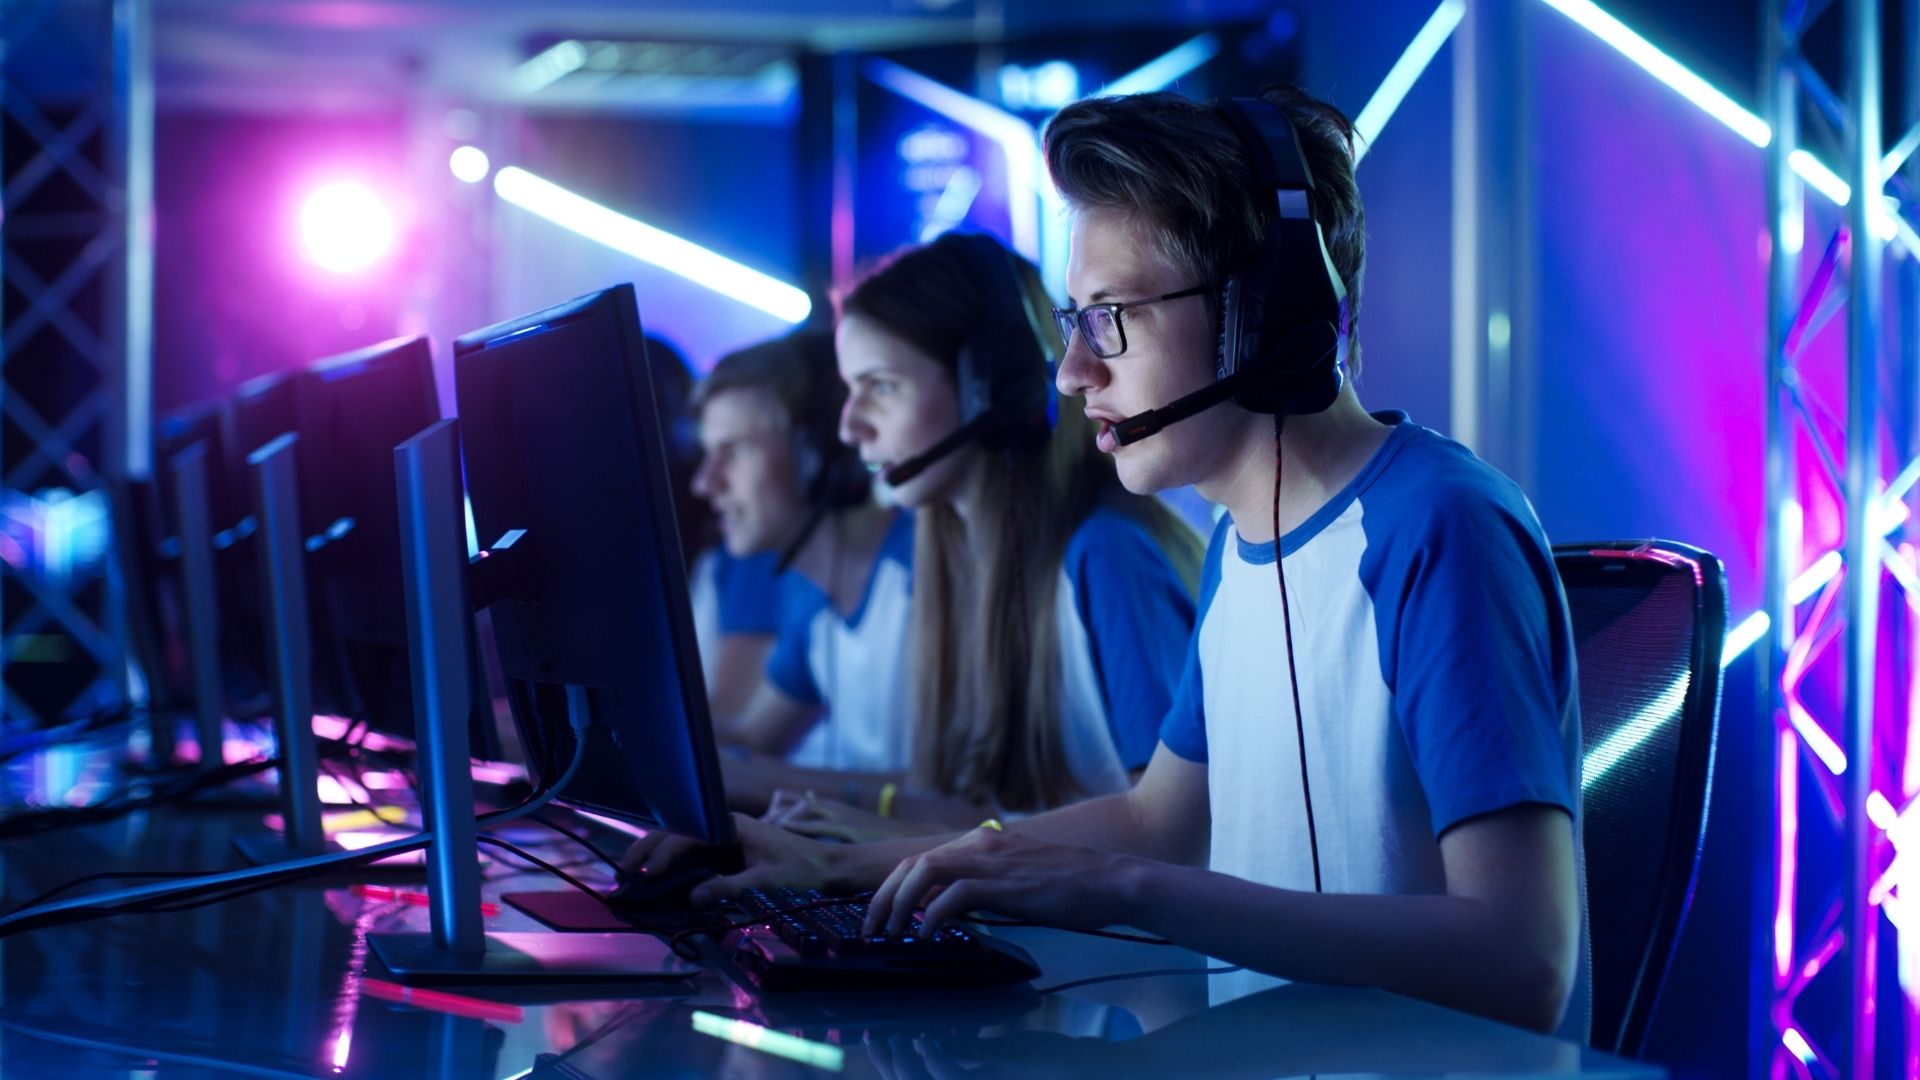 How The Growth of Esports Could Transform College Enrollment